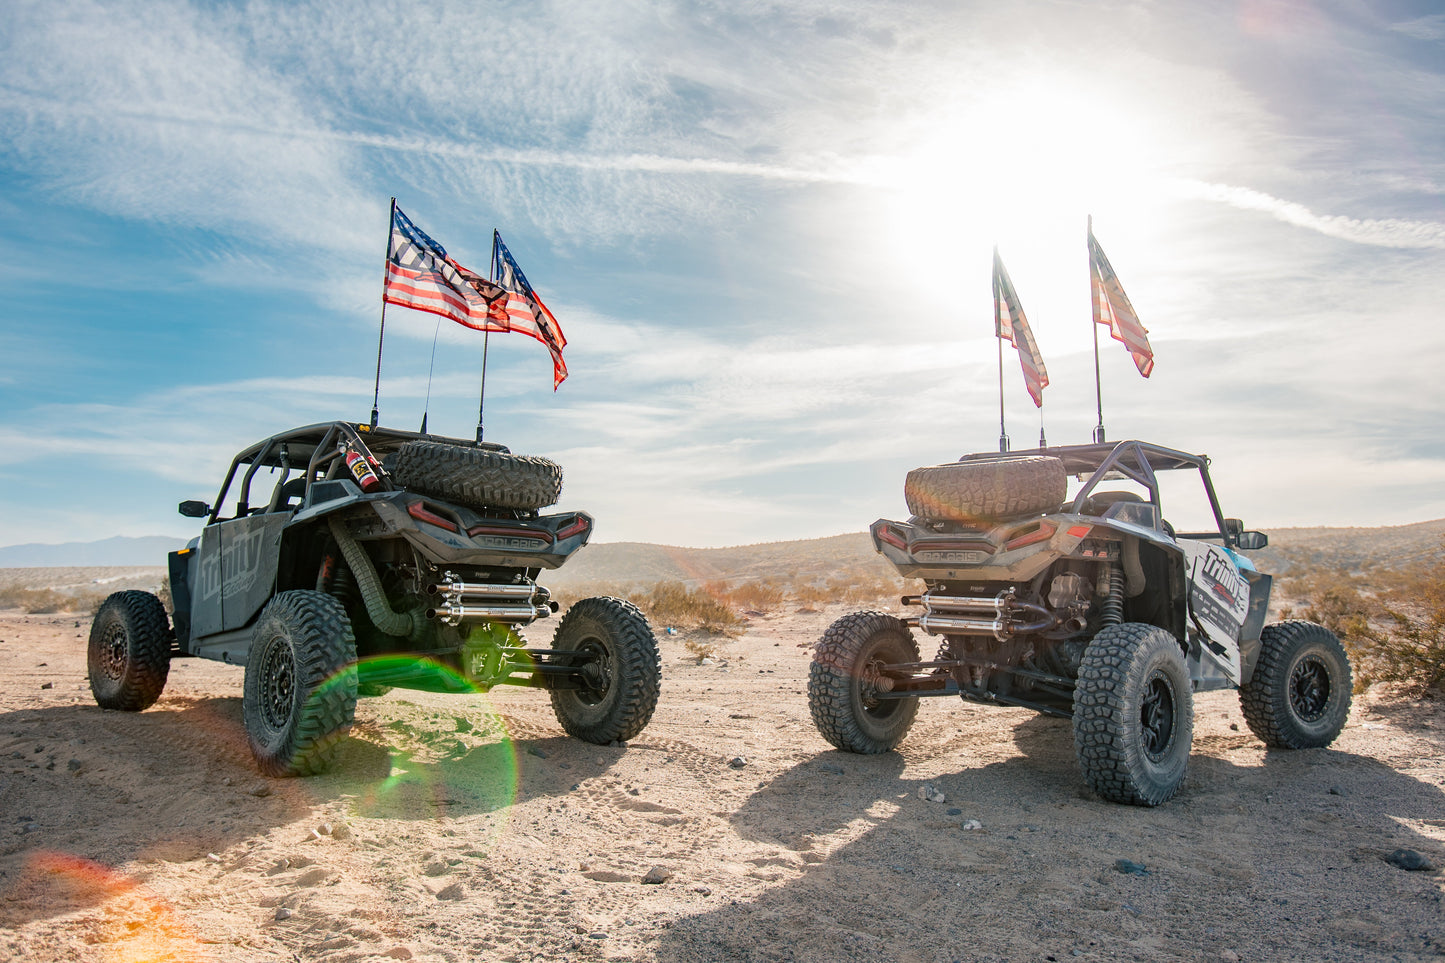 Trinity Racing Stainless Steel RZR TURBO S FULL SYSTEM on two machines in desert